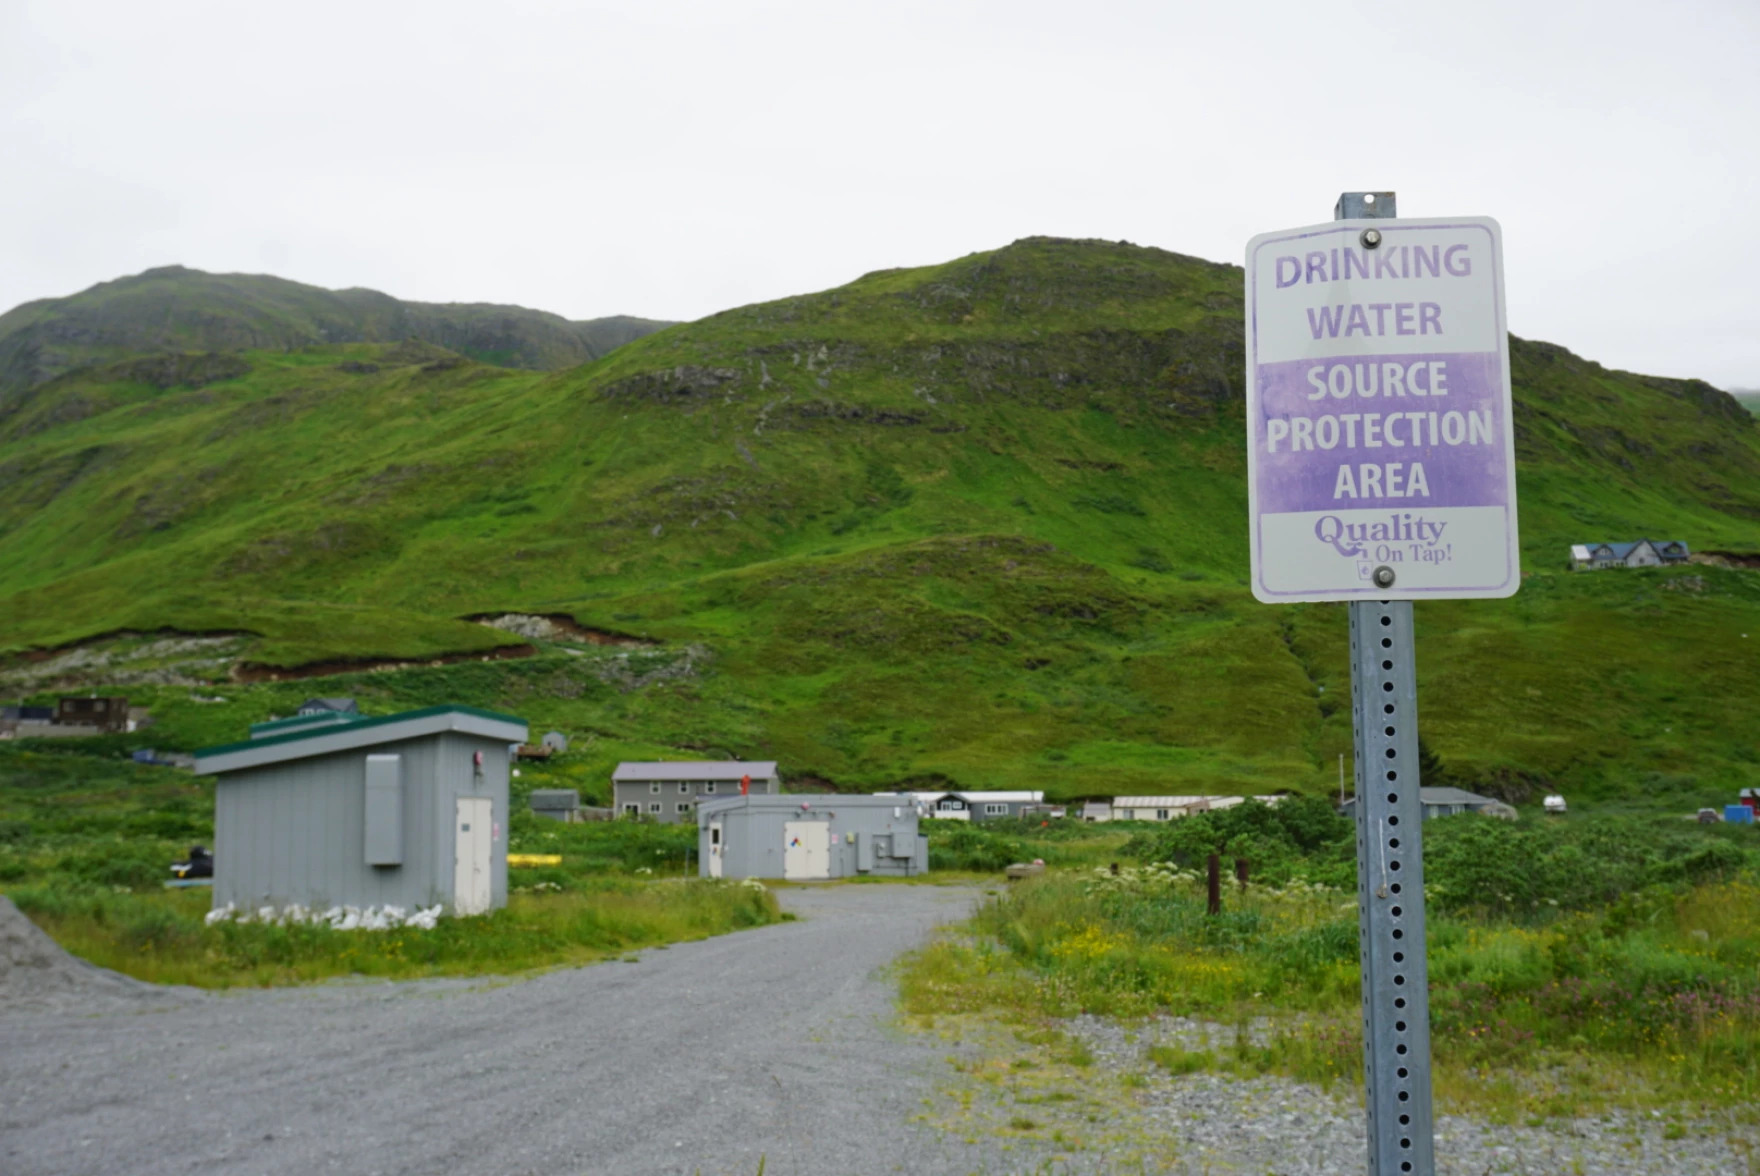 an landscape photo with a sign that says "drinking water source protection area"